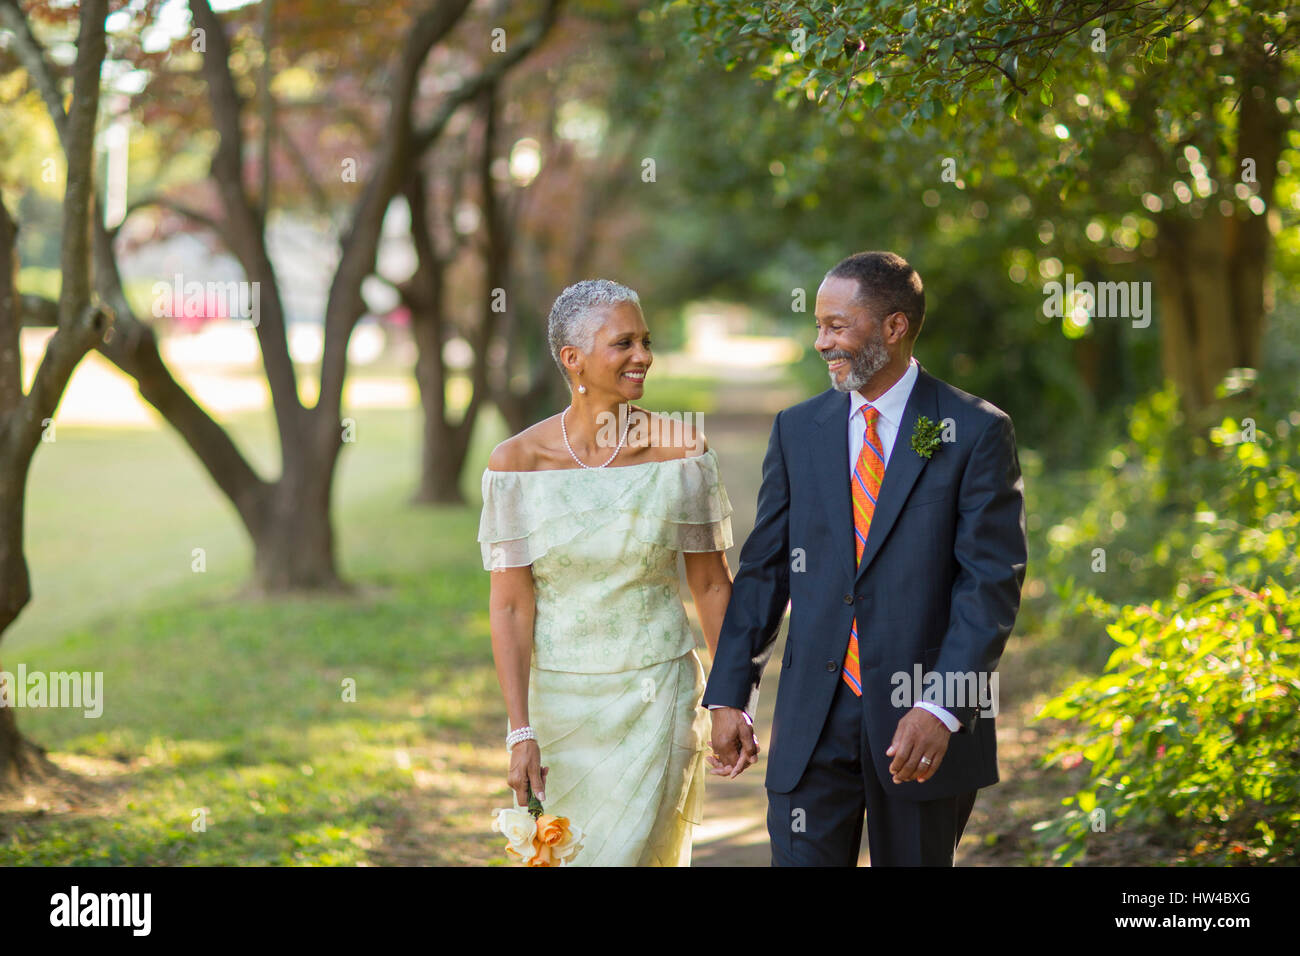 Black couple walking on path in park Banque D'Images